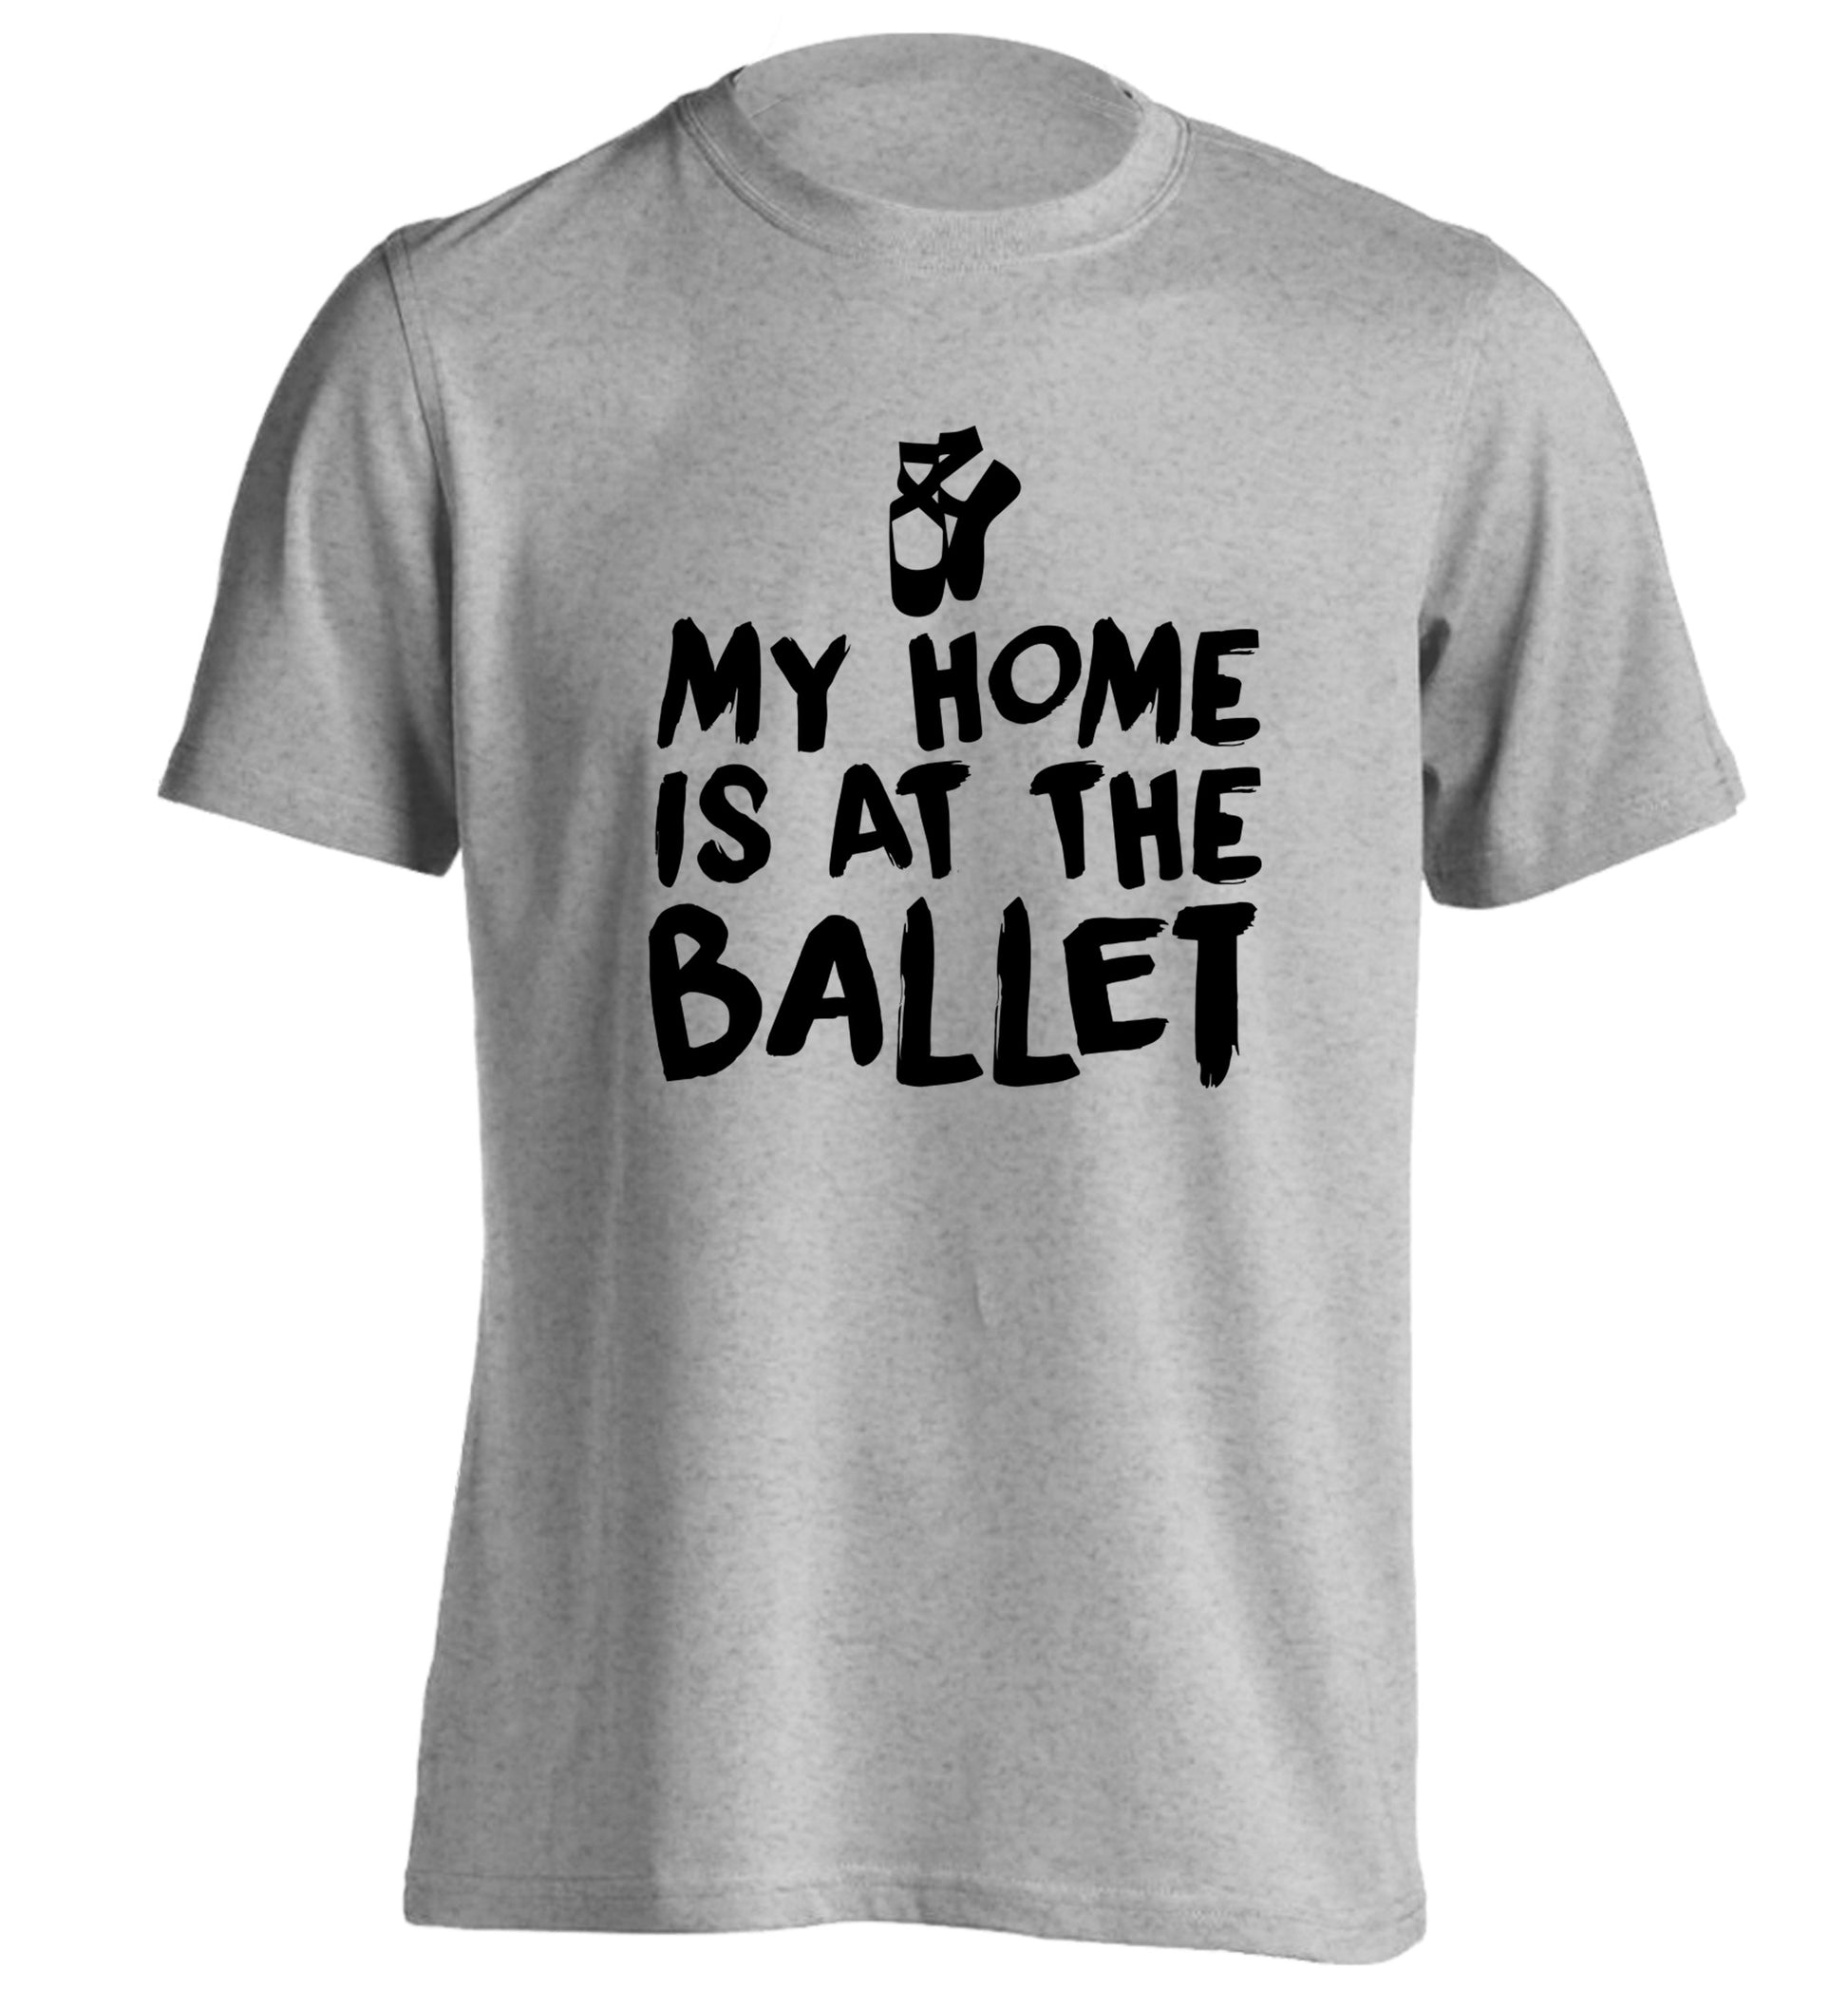 My home is at the dance studio adults unisex grey Tshirt 2XL